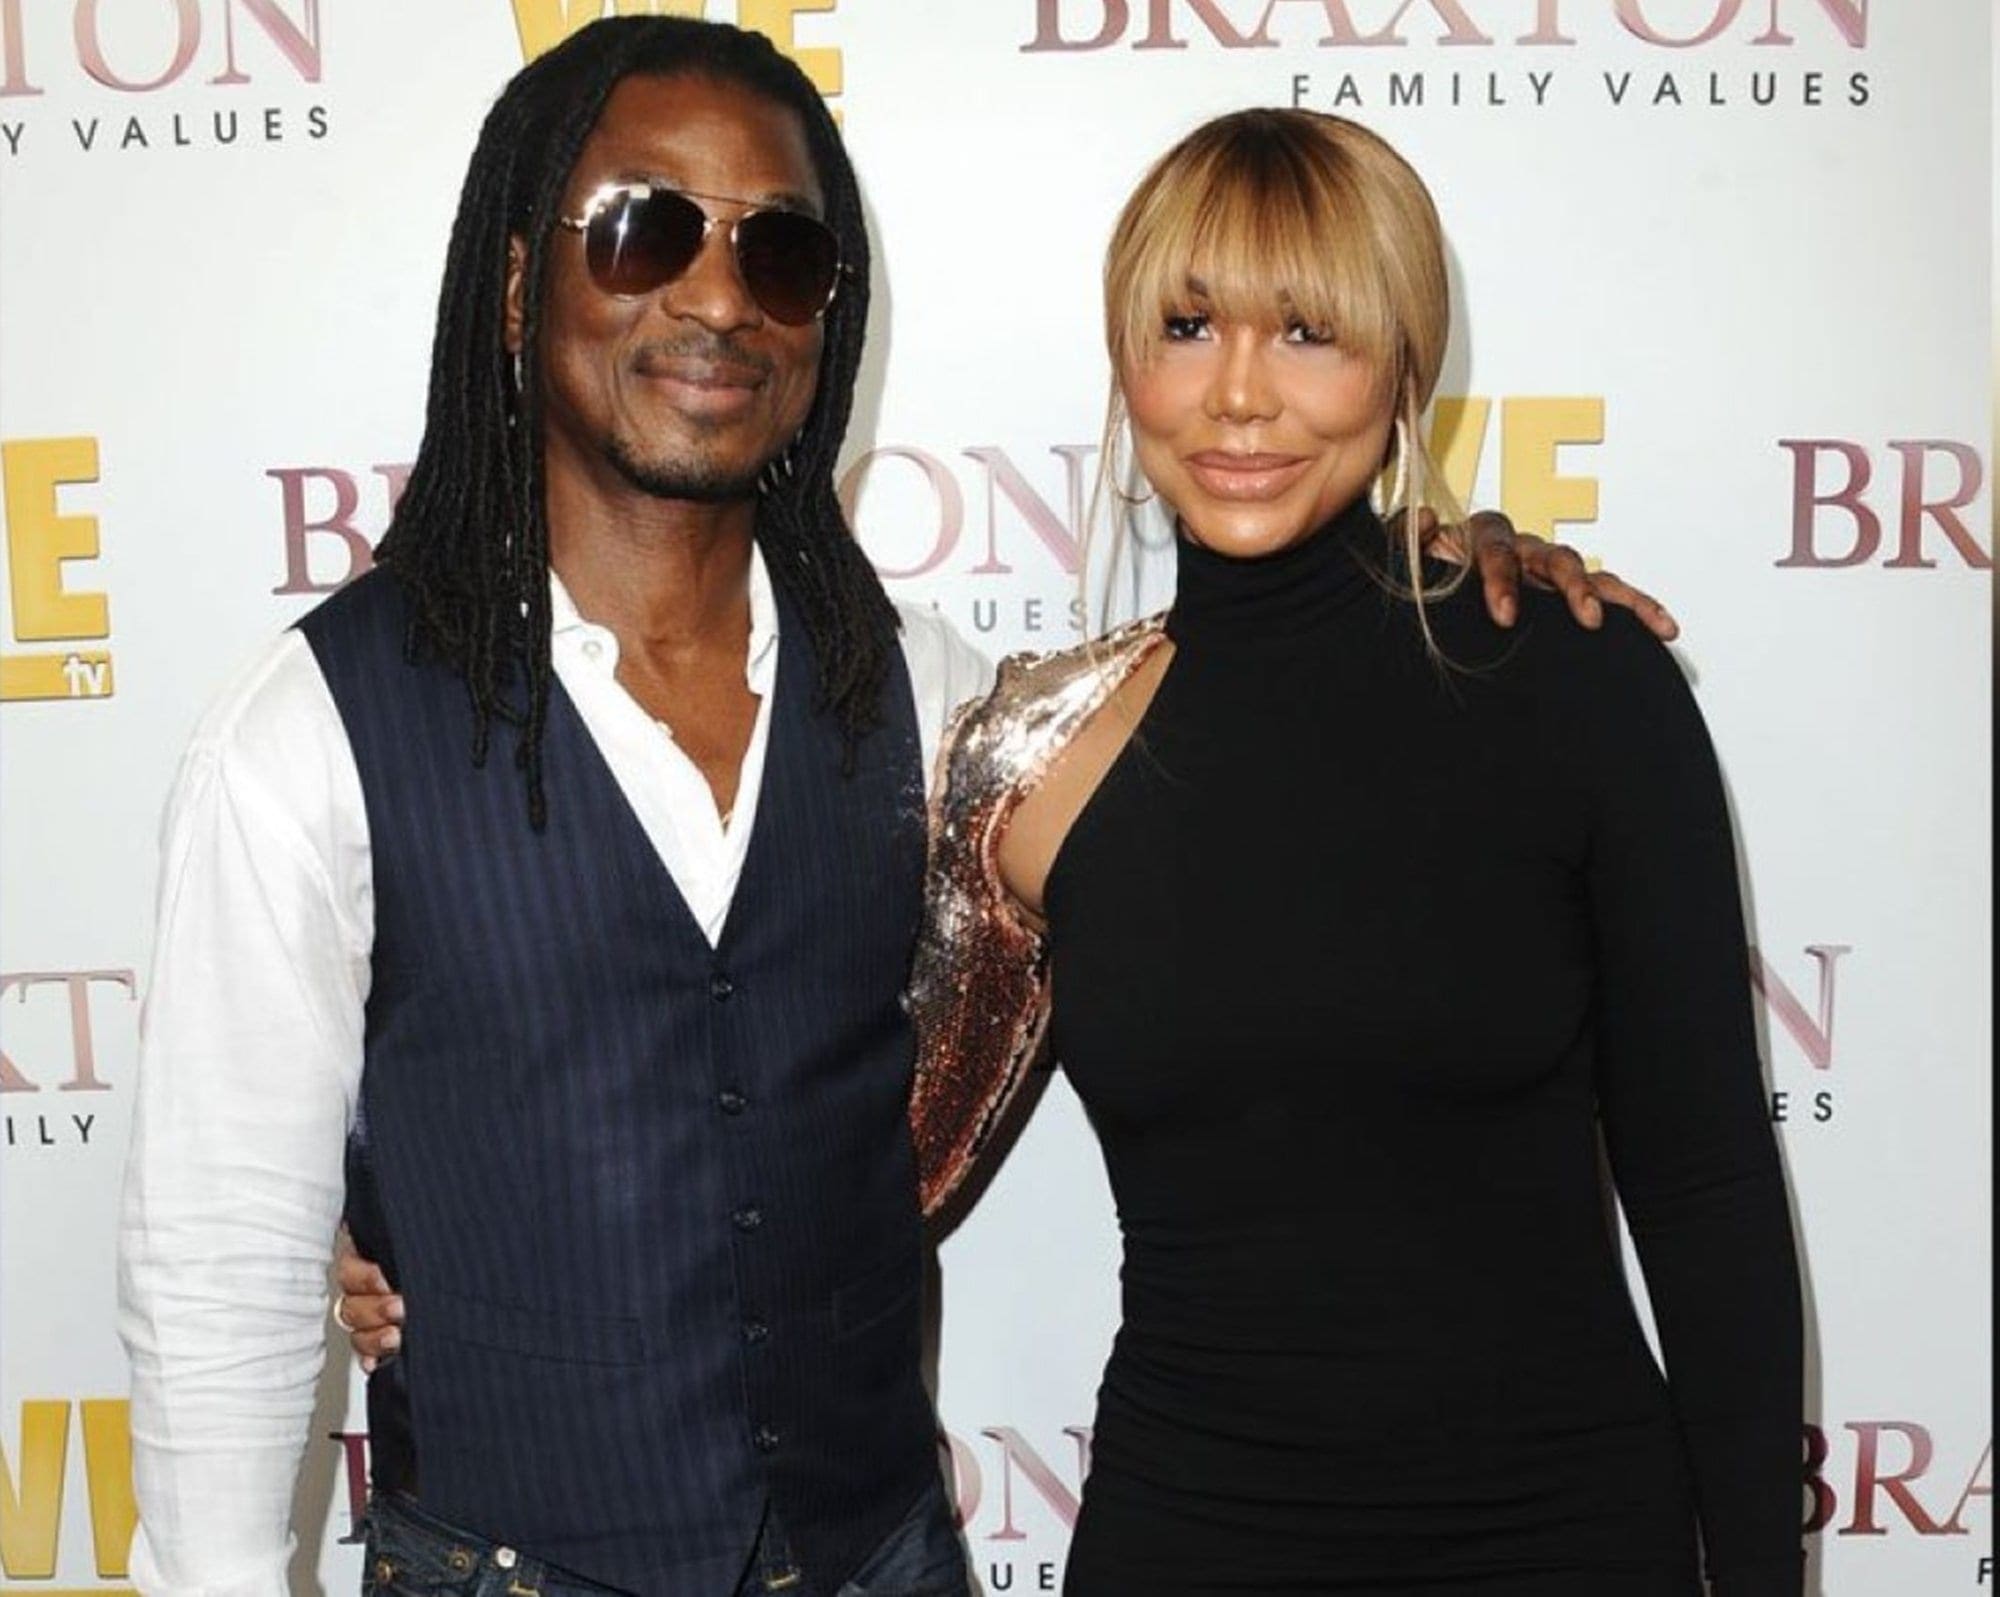 Tamar Braxton's Sisters, Trina And Towanda, Together With Their Men, Will Join Her And David Adefeso Online For A Discussion About Blending Families